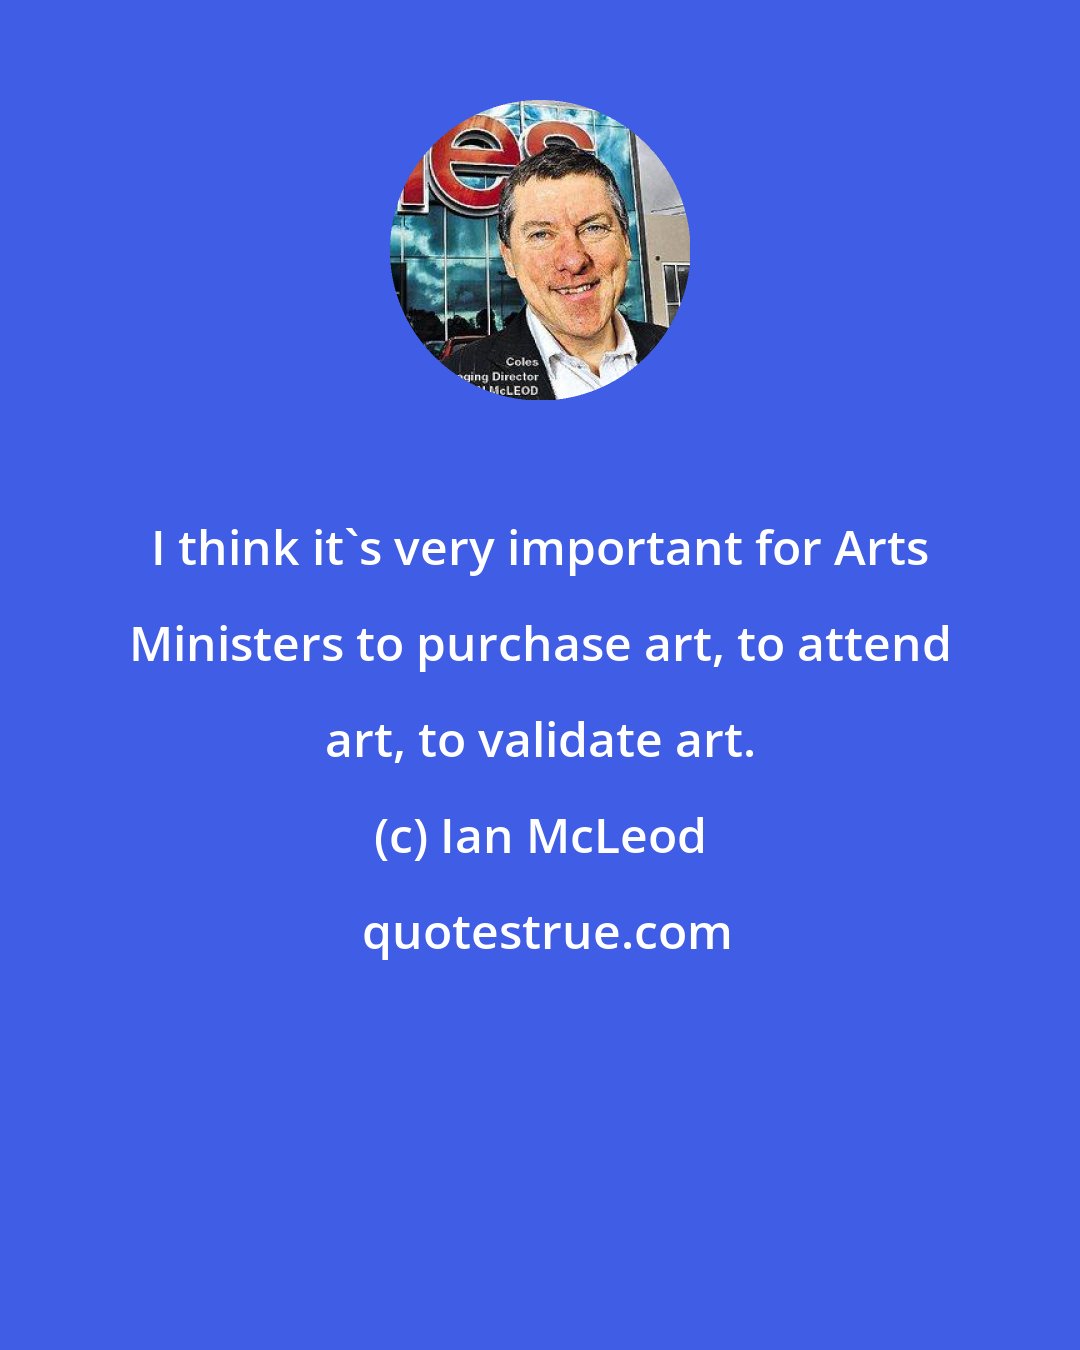 Ian McLeod: I think it's very important for Arts Ministers to purchase art, to attend art, to validate art.